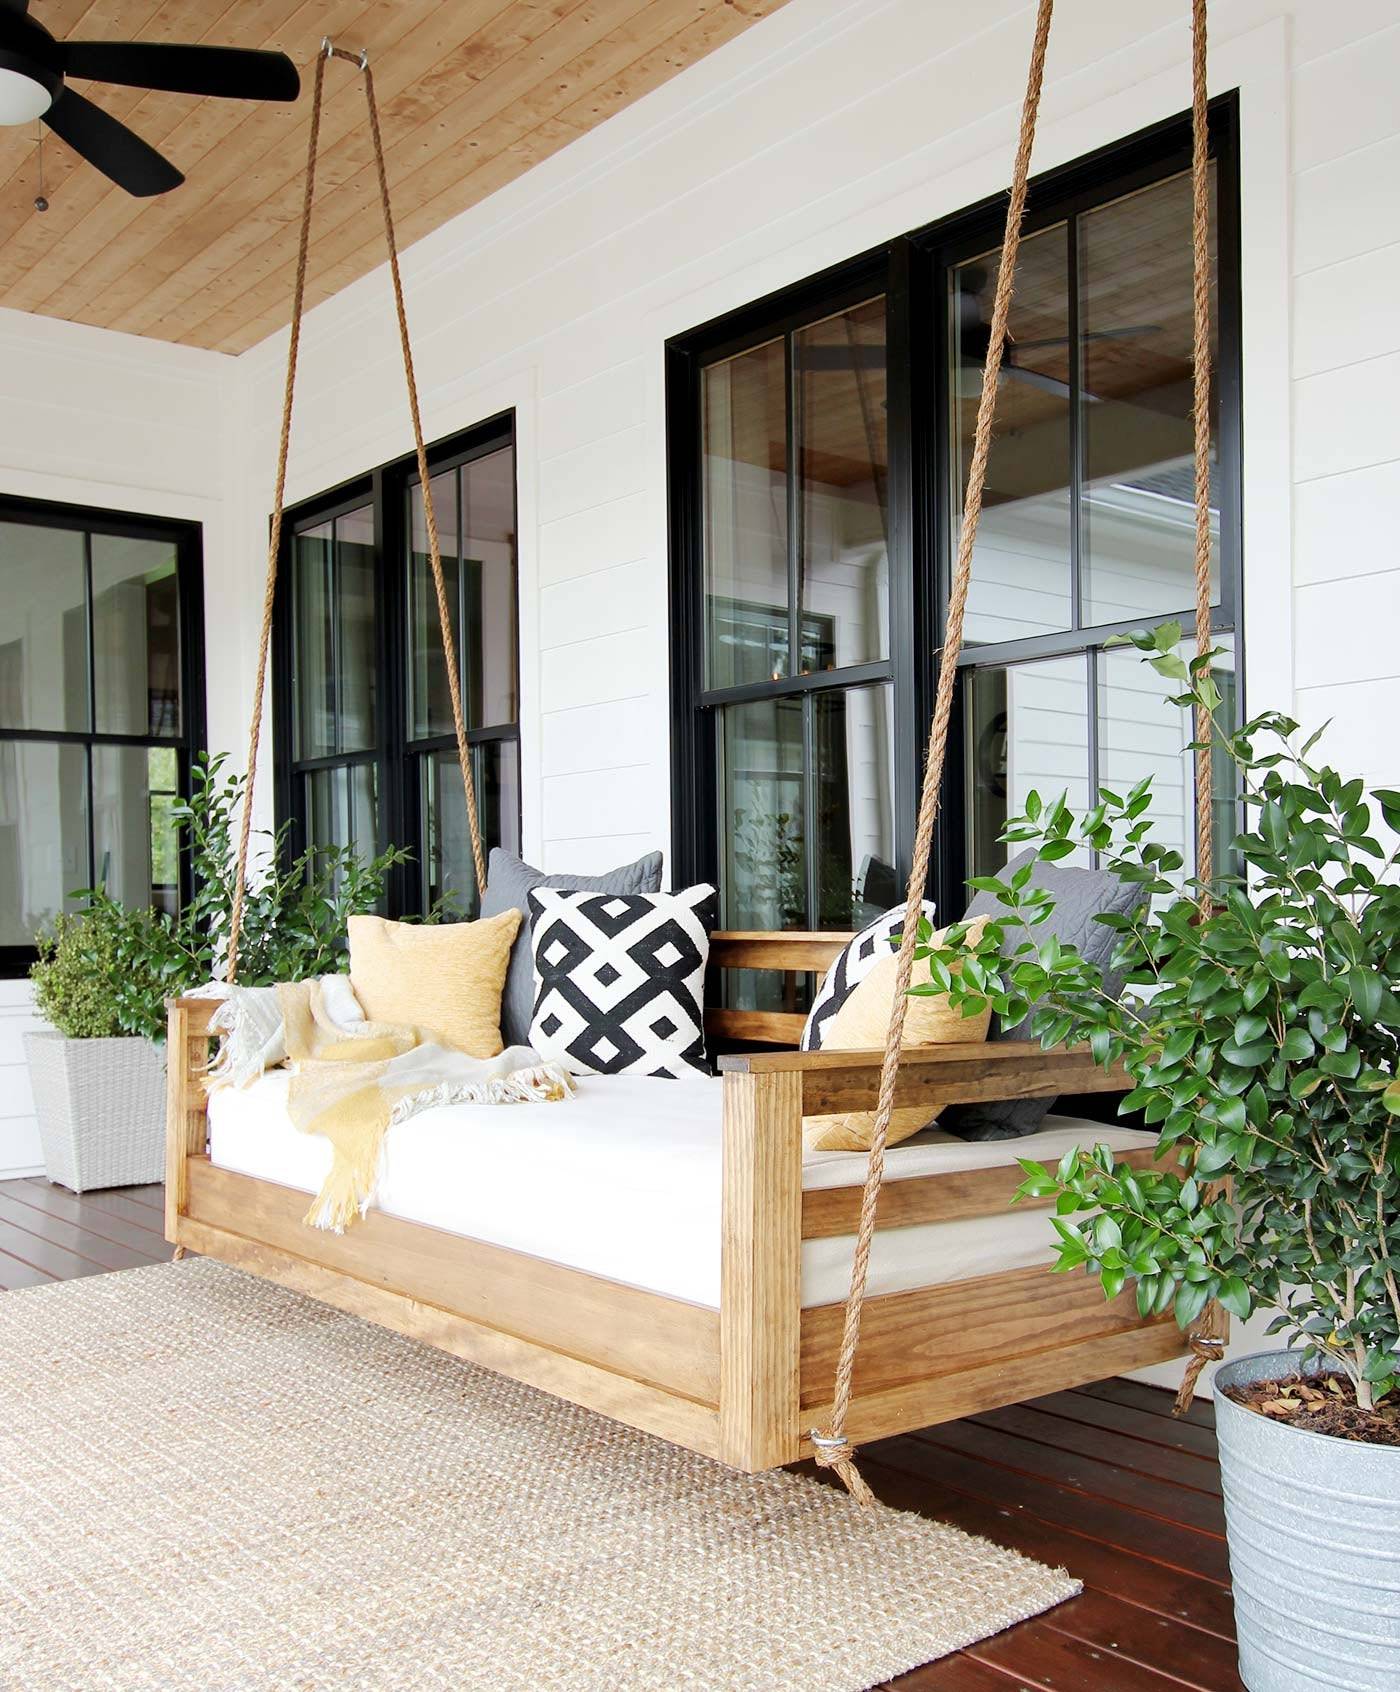 Hanging swing with cushions